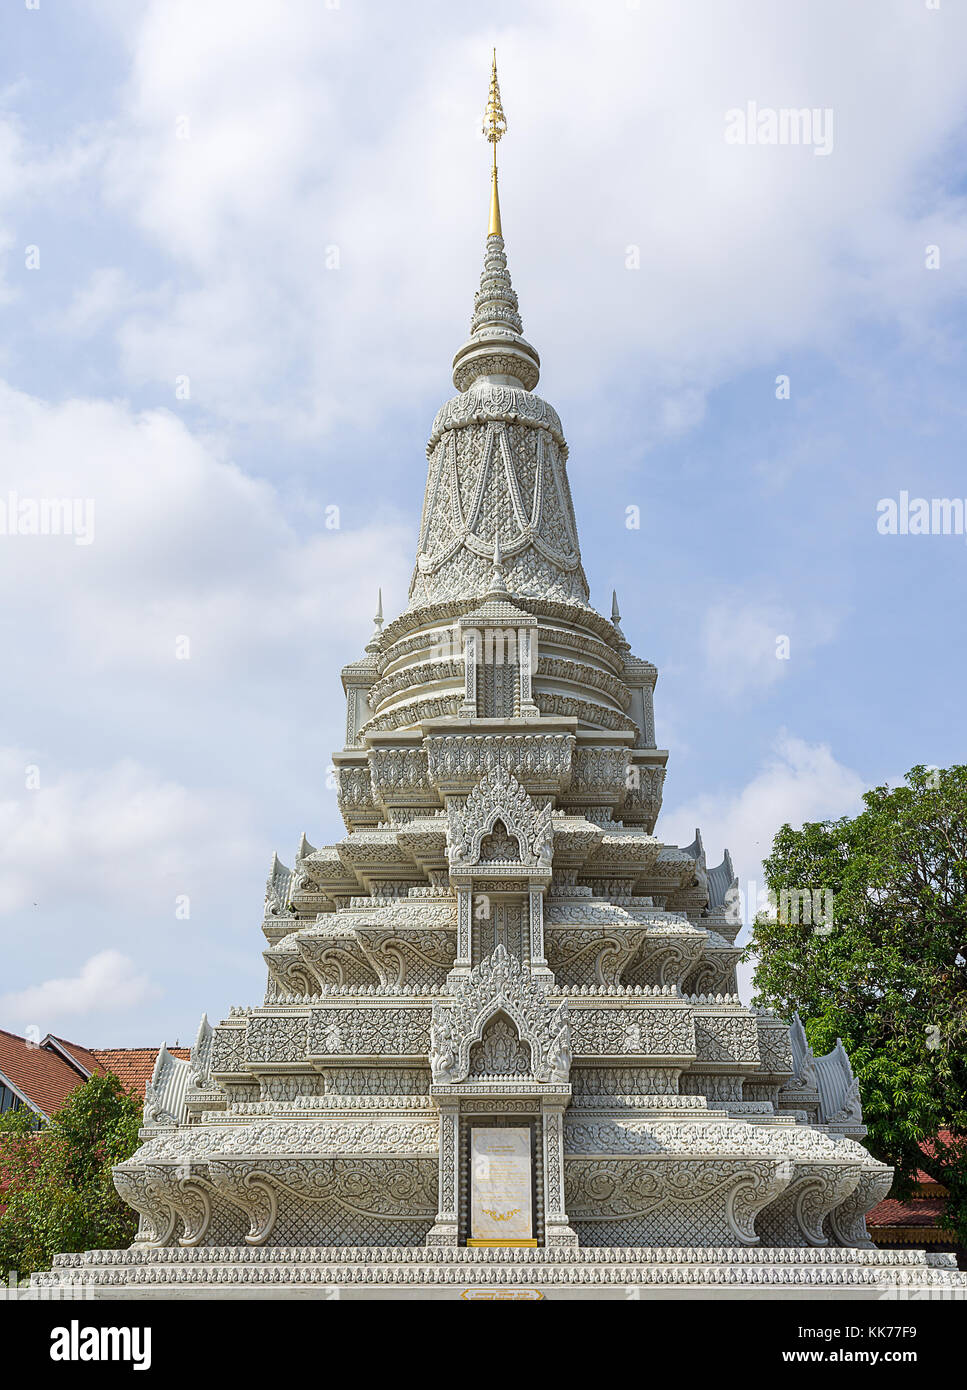 Un bianco stupa in Royal Palace complesso in Phnom Penh Cambogia. Foto Stock